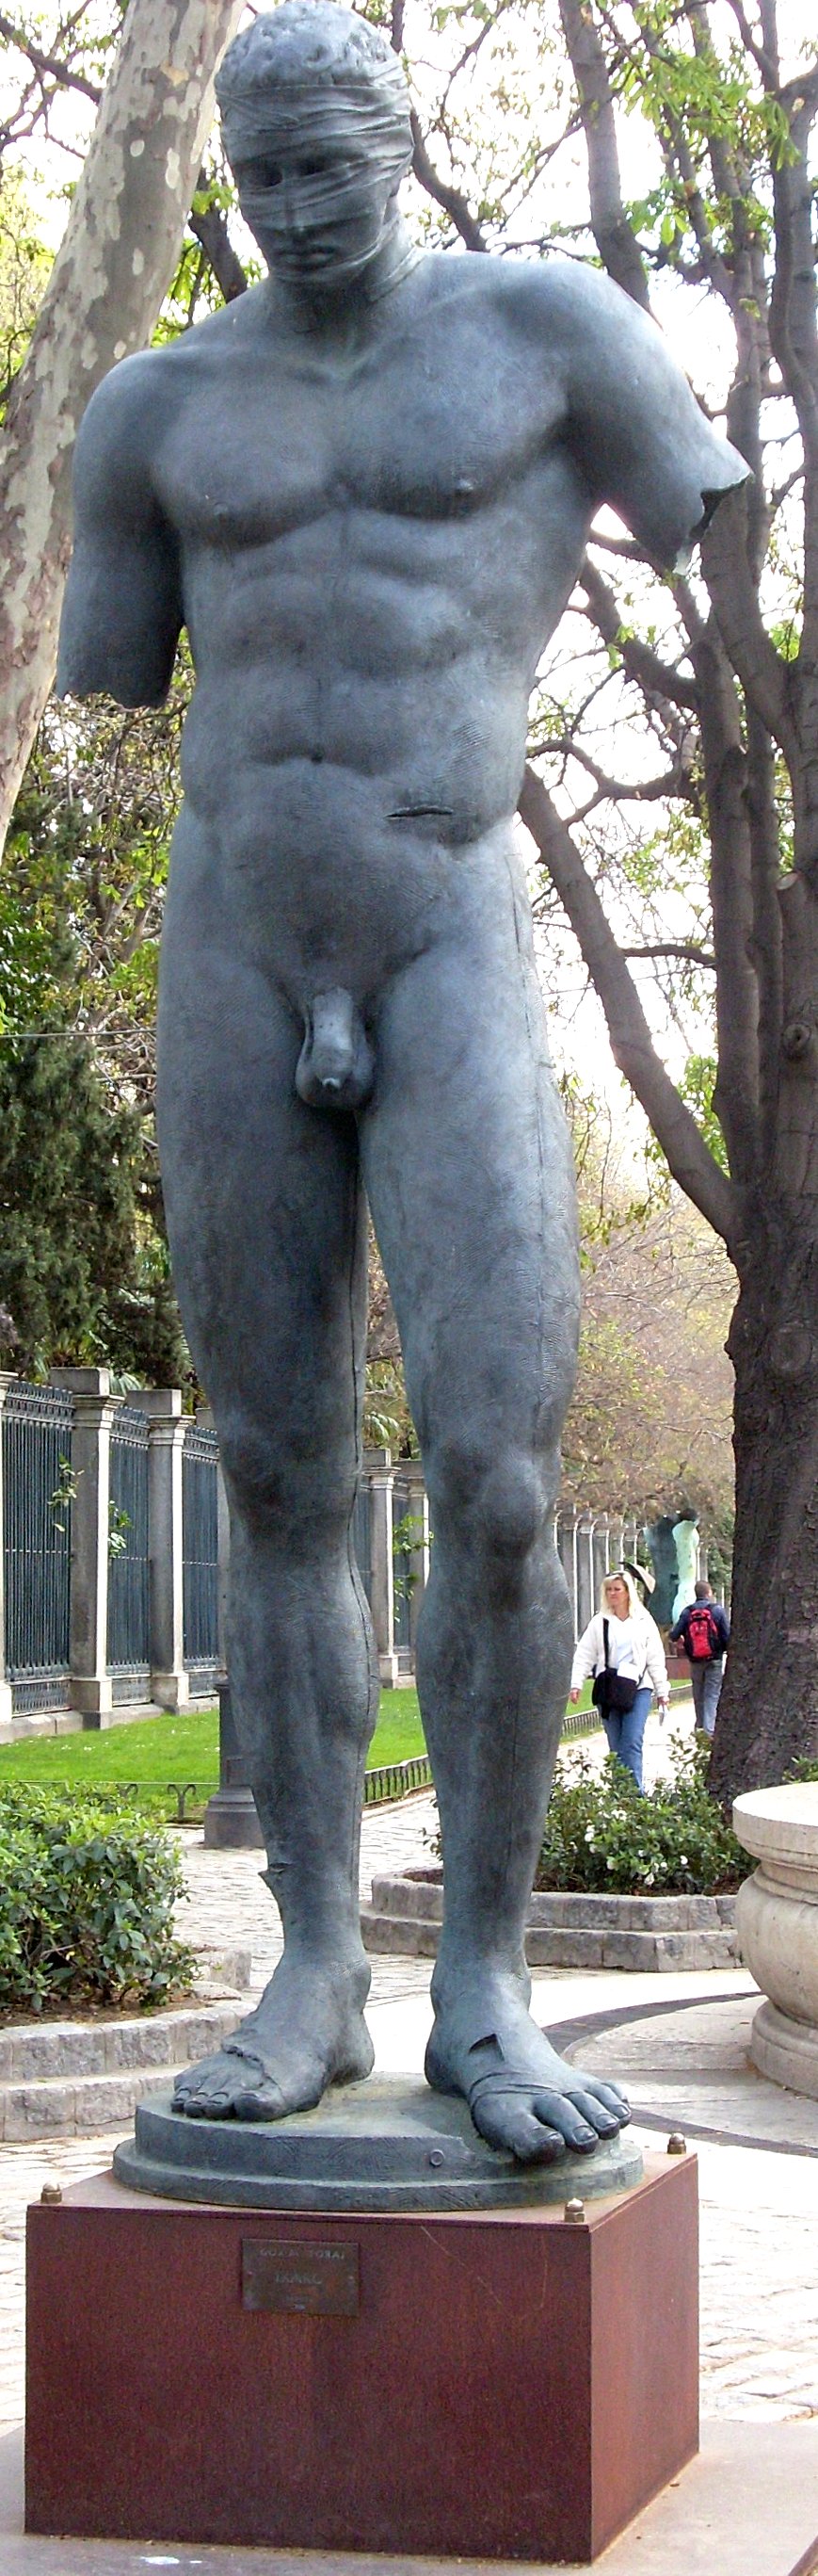 the large statue is dressed in silver